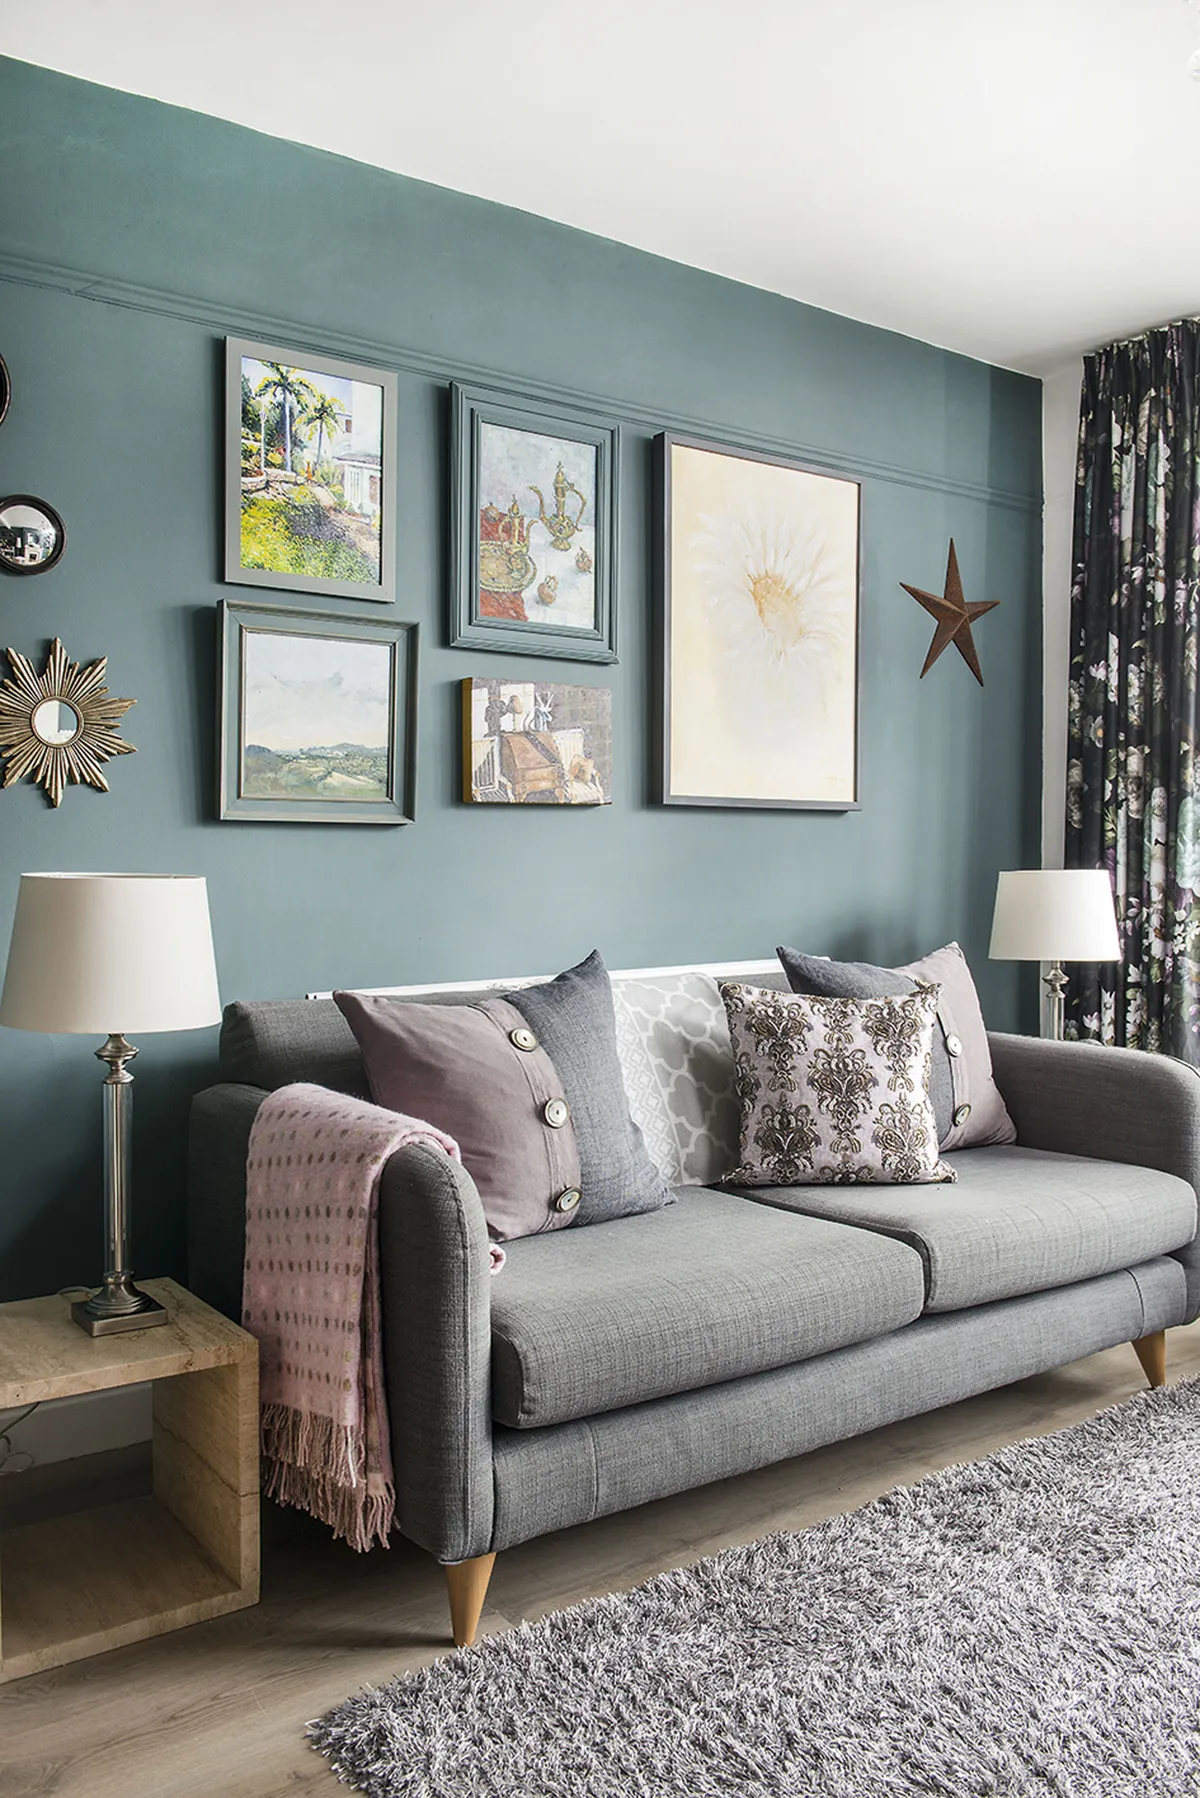 A gallery wall behind the sofa displays paintings by Sarah’s husband, Colin, along with the Moroccan Teapot by Clova Stuart-Hamilton. Accessories from Garden Barn Emporium and textiles in a mix of plains and prints add to the arty vibe